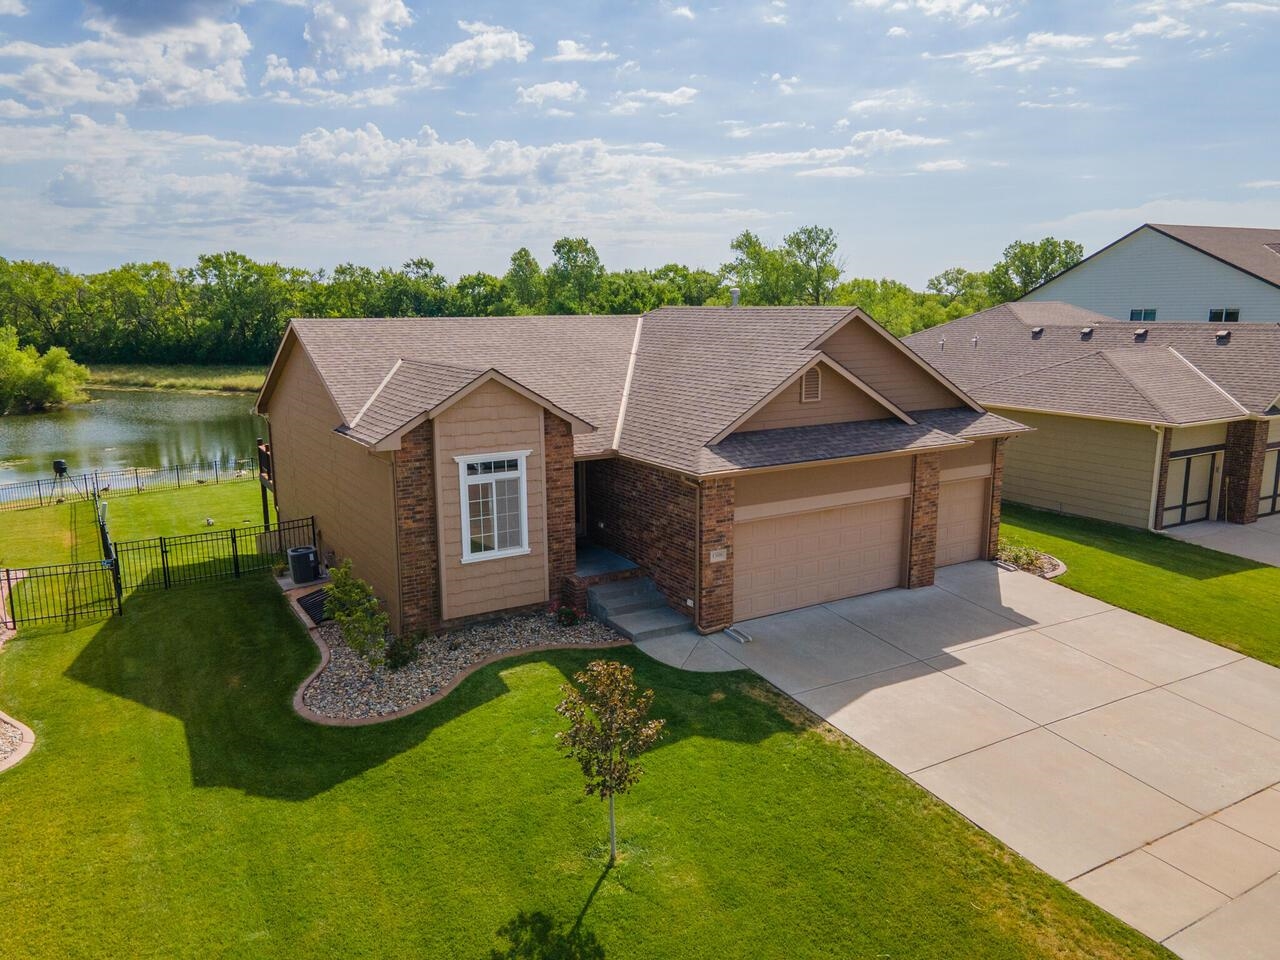 Welcome home to this move-in-ready ranch with breathtaking pond views from almost every window! This